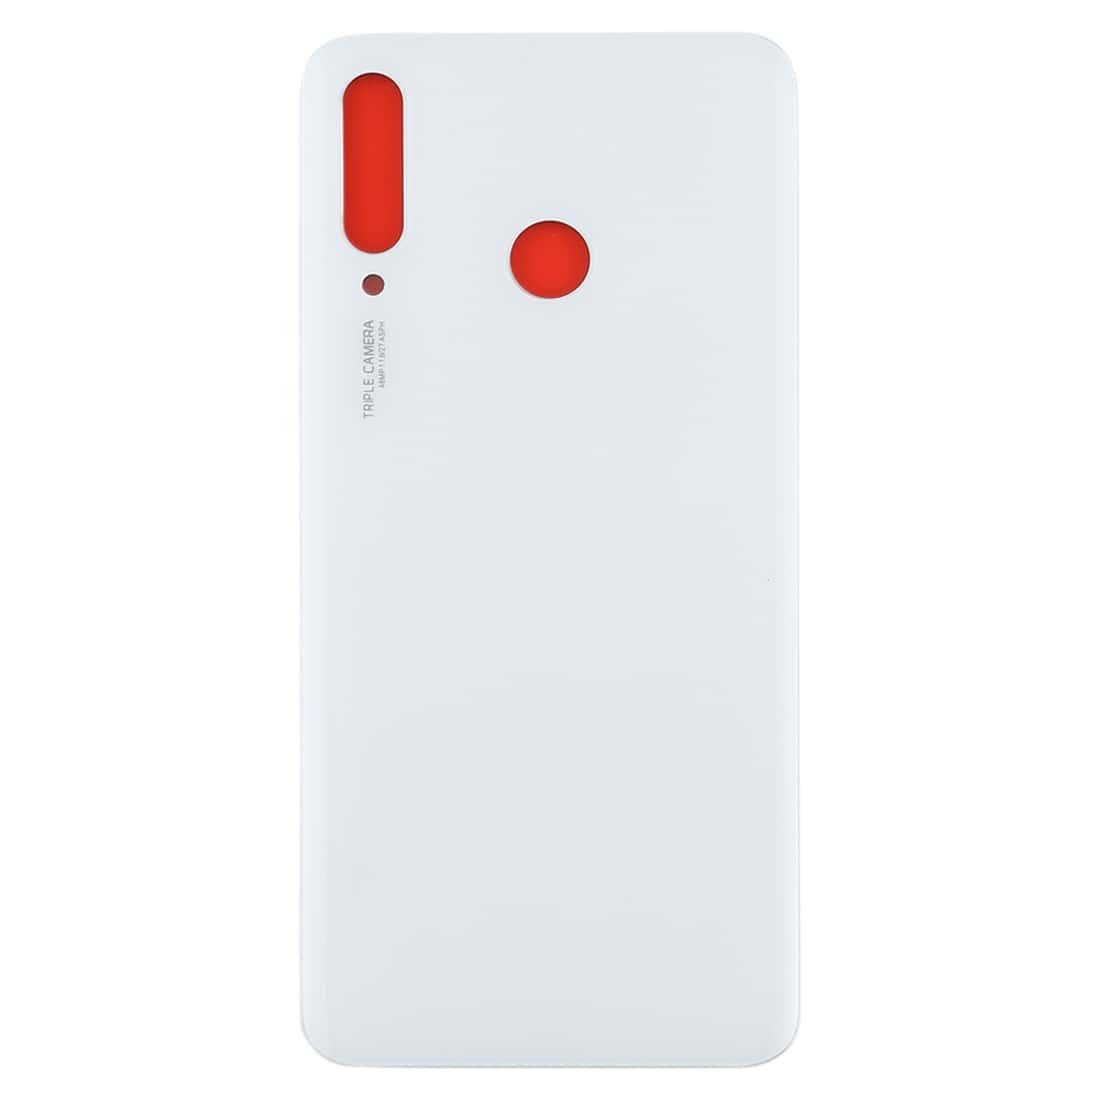 Back Glass Panel for Huawei P30 Lite White with Camera Lens